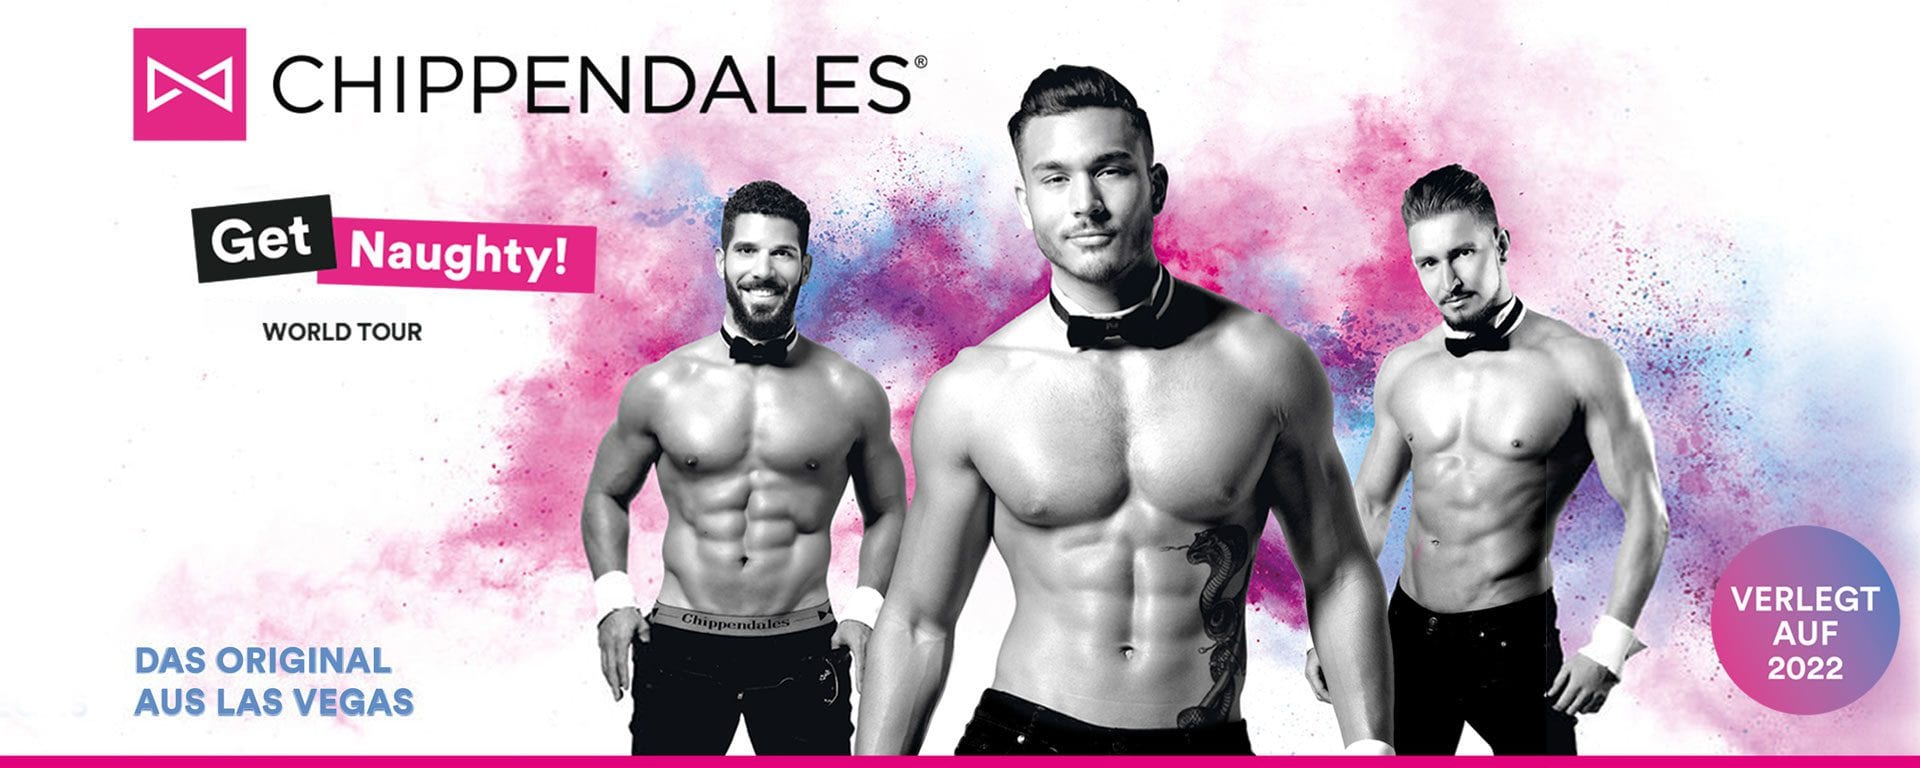 CHIPPENDALES